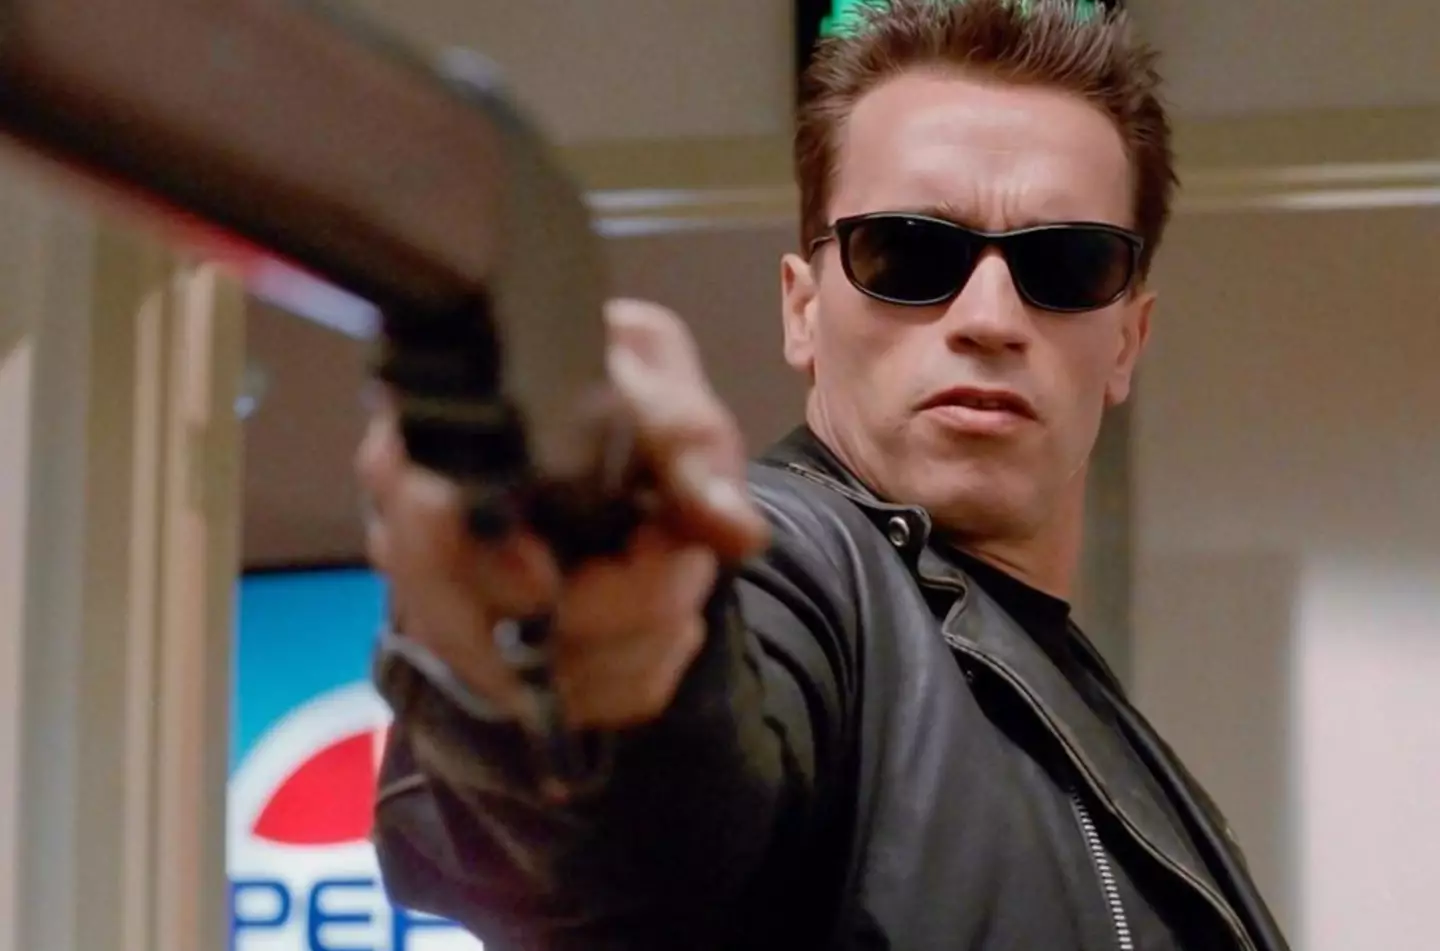 Schwarzenegger played the titular role in The Terminator franchise.